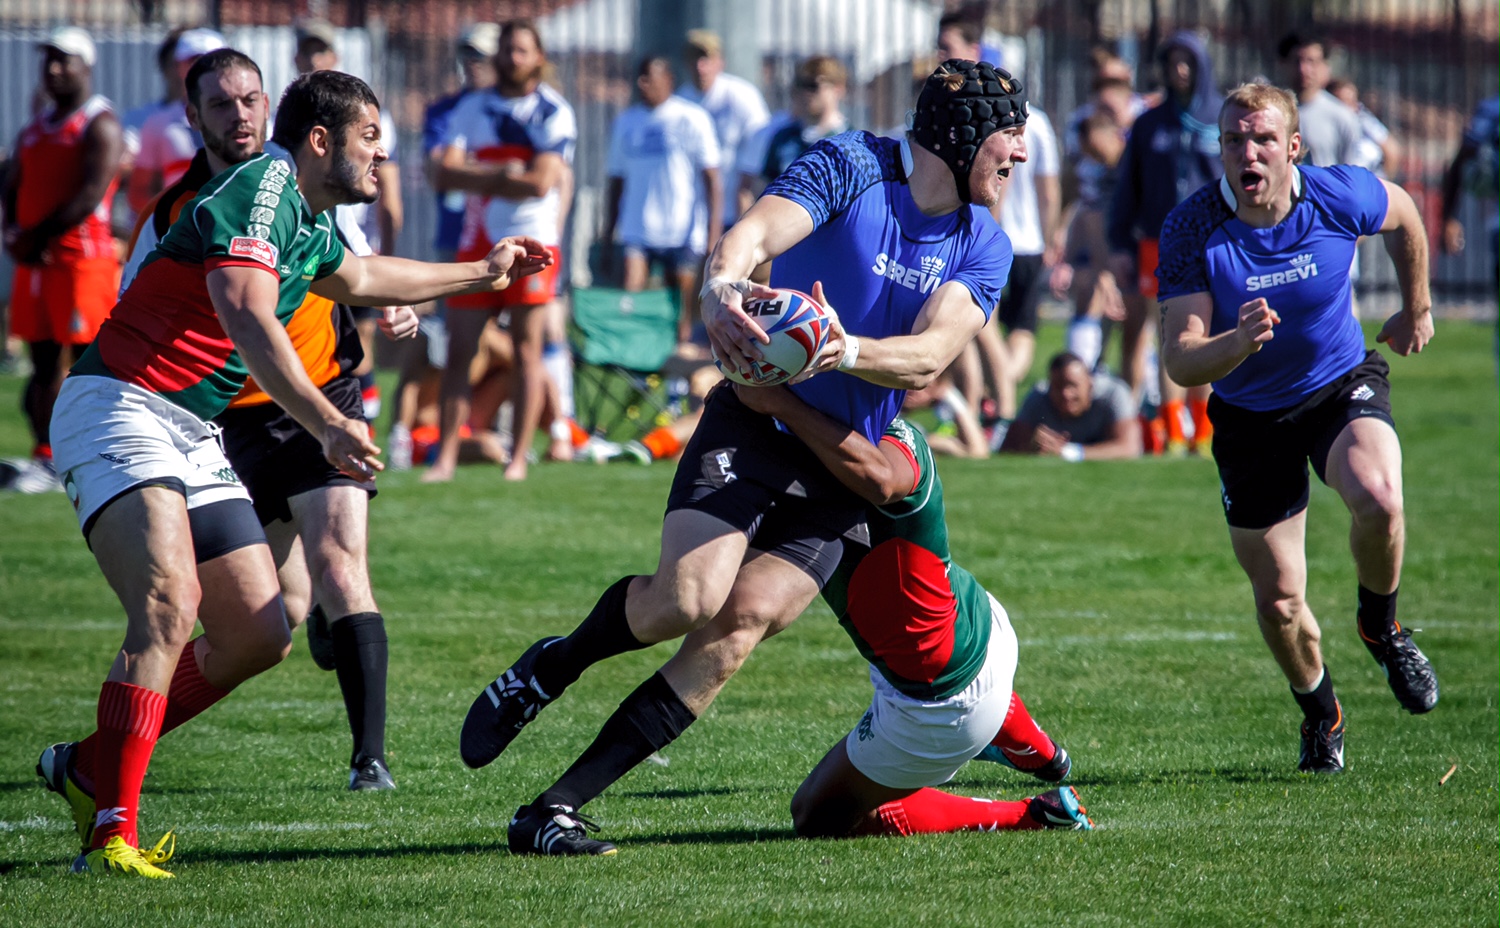 Ben Landry for Serevi Selects Rugby